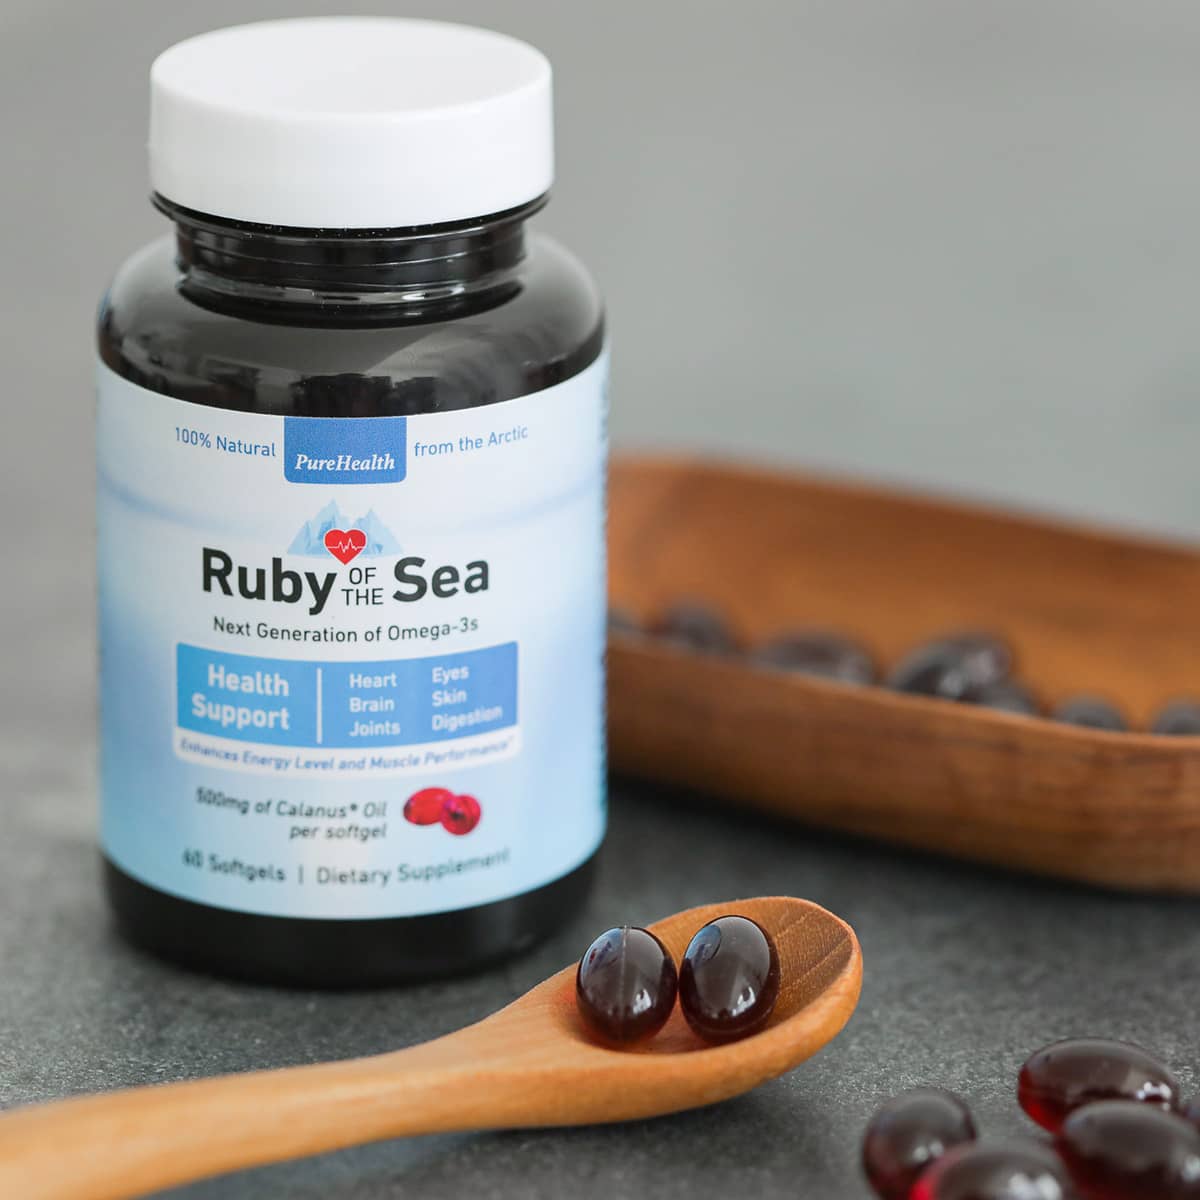 One Time Purchase - 3 Bottles of Ruby of the Sea® Oil 500mg - 60 softgels per bottle